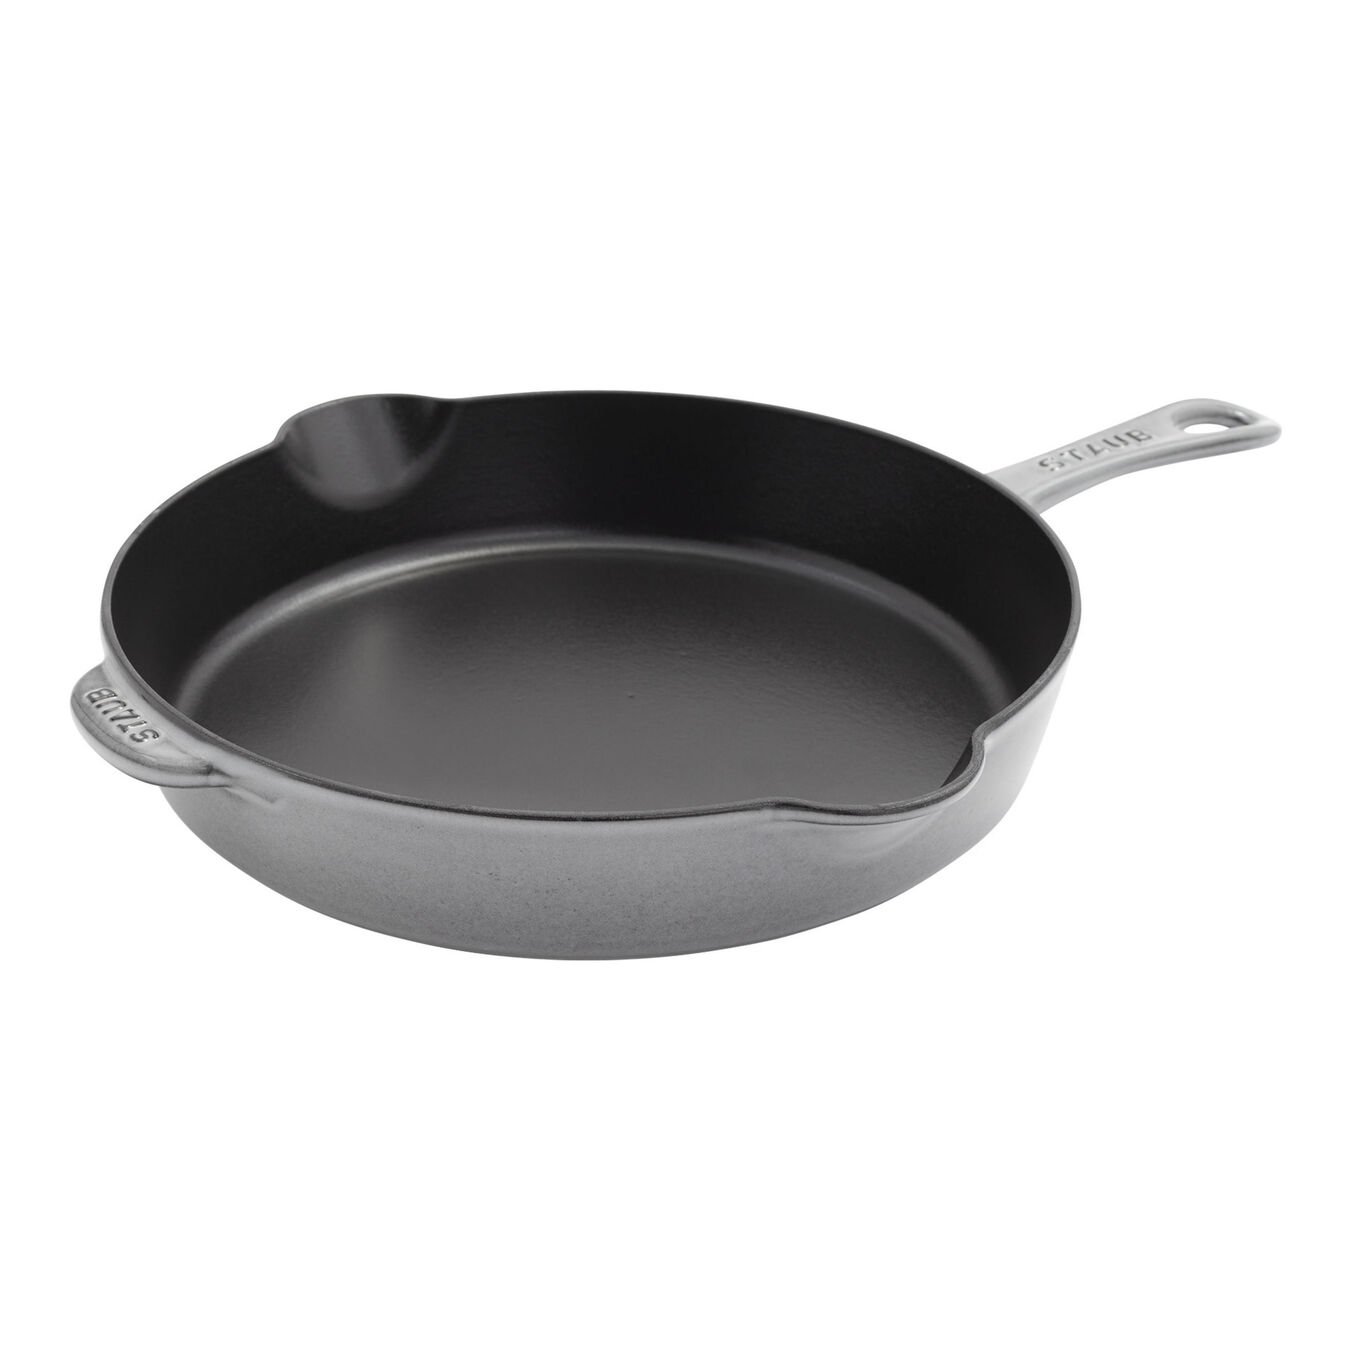 28 cm / 11 inch cast iron Traditional Deep Frypan, graphite-grey,,large 1